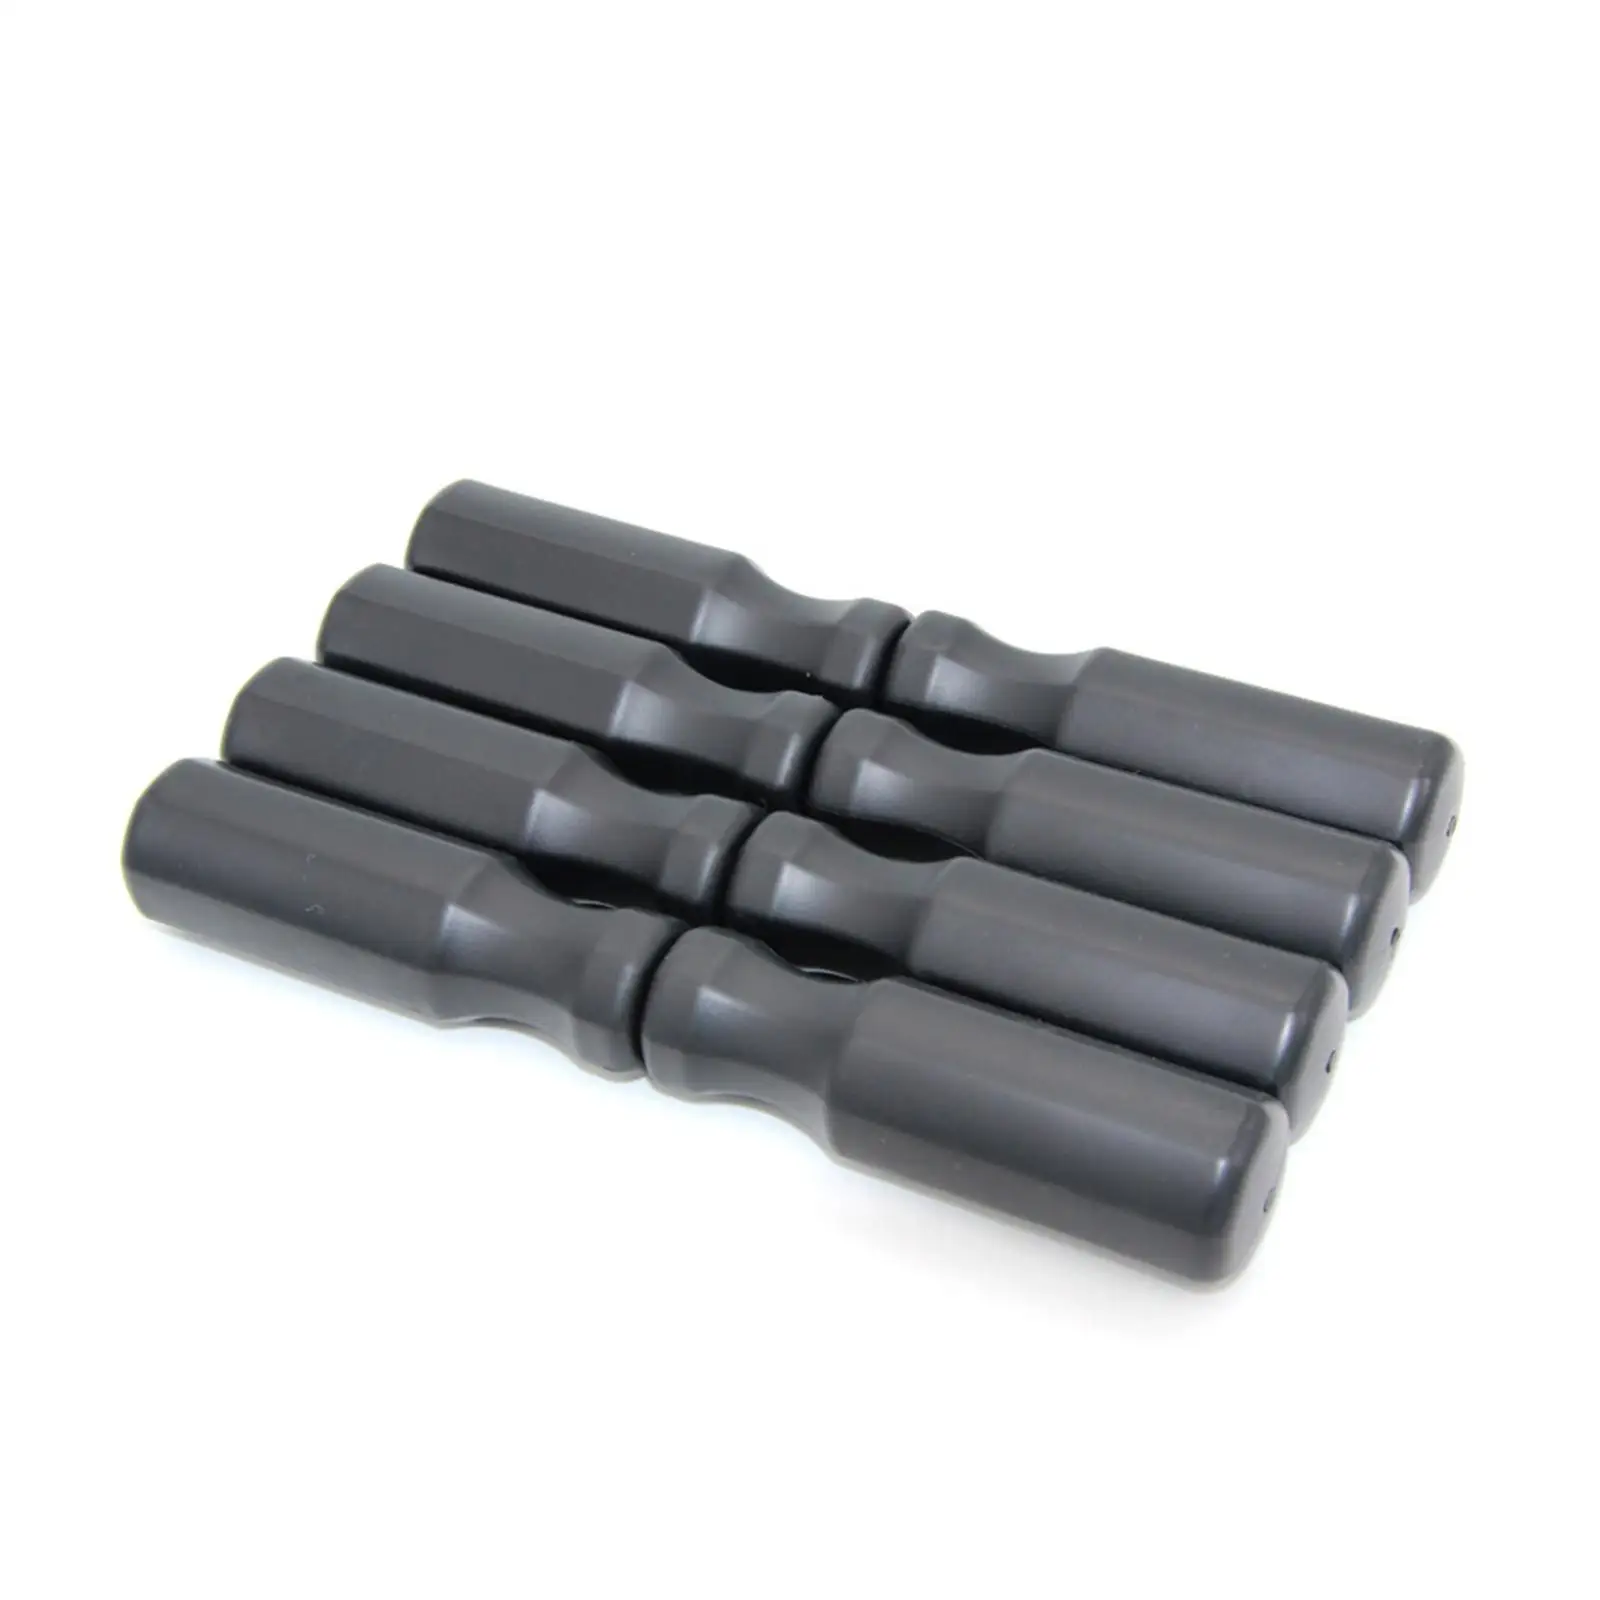 8 Pieces Foosball Handle Grip, Lightweight Portable Easy Install, Practical